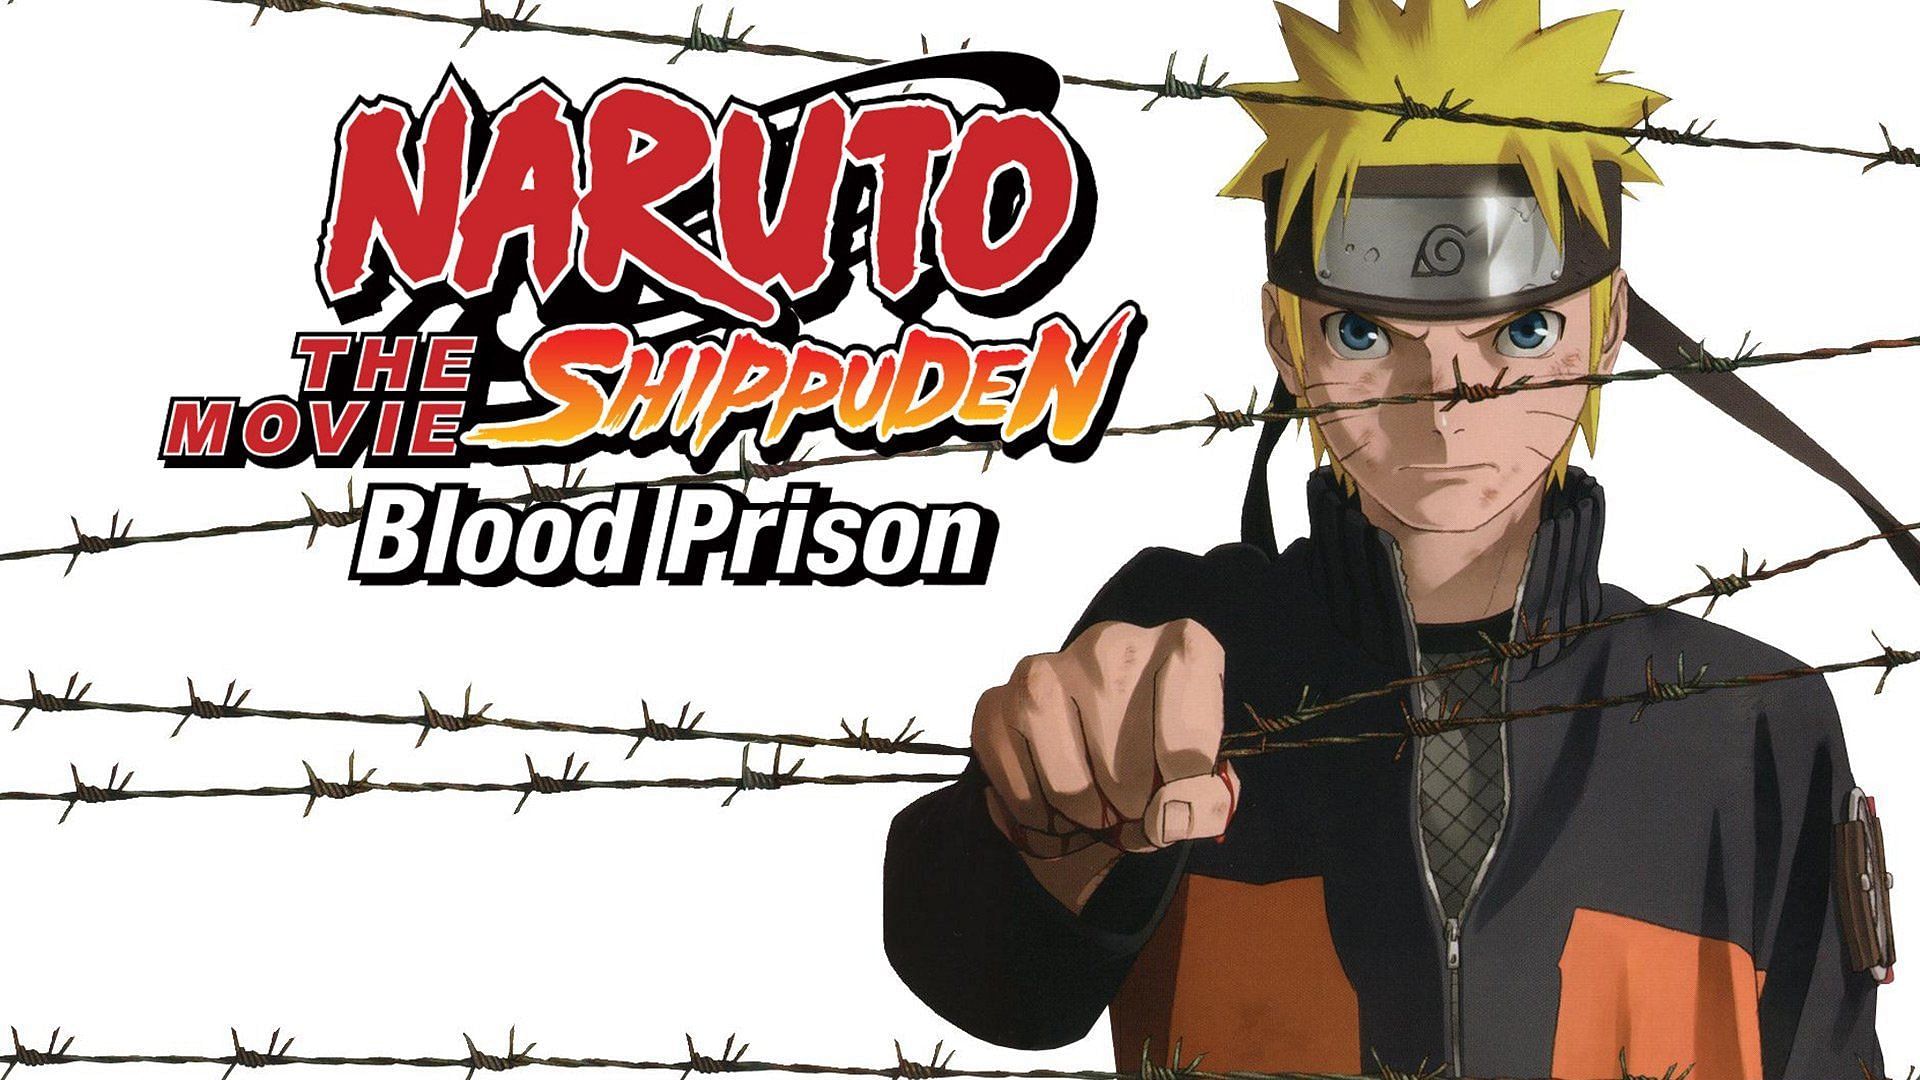 10 most interesting anime from Studio Pierrot apart from Naruto